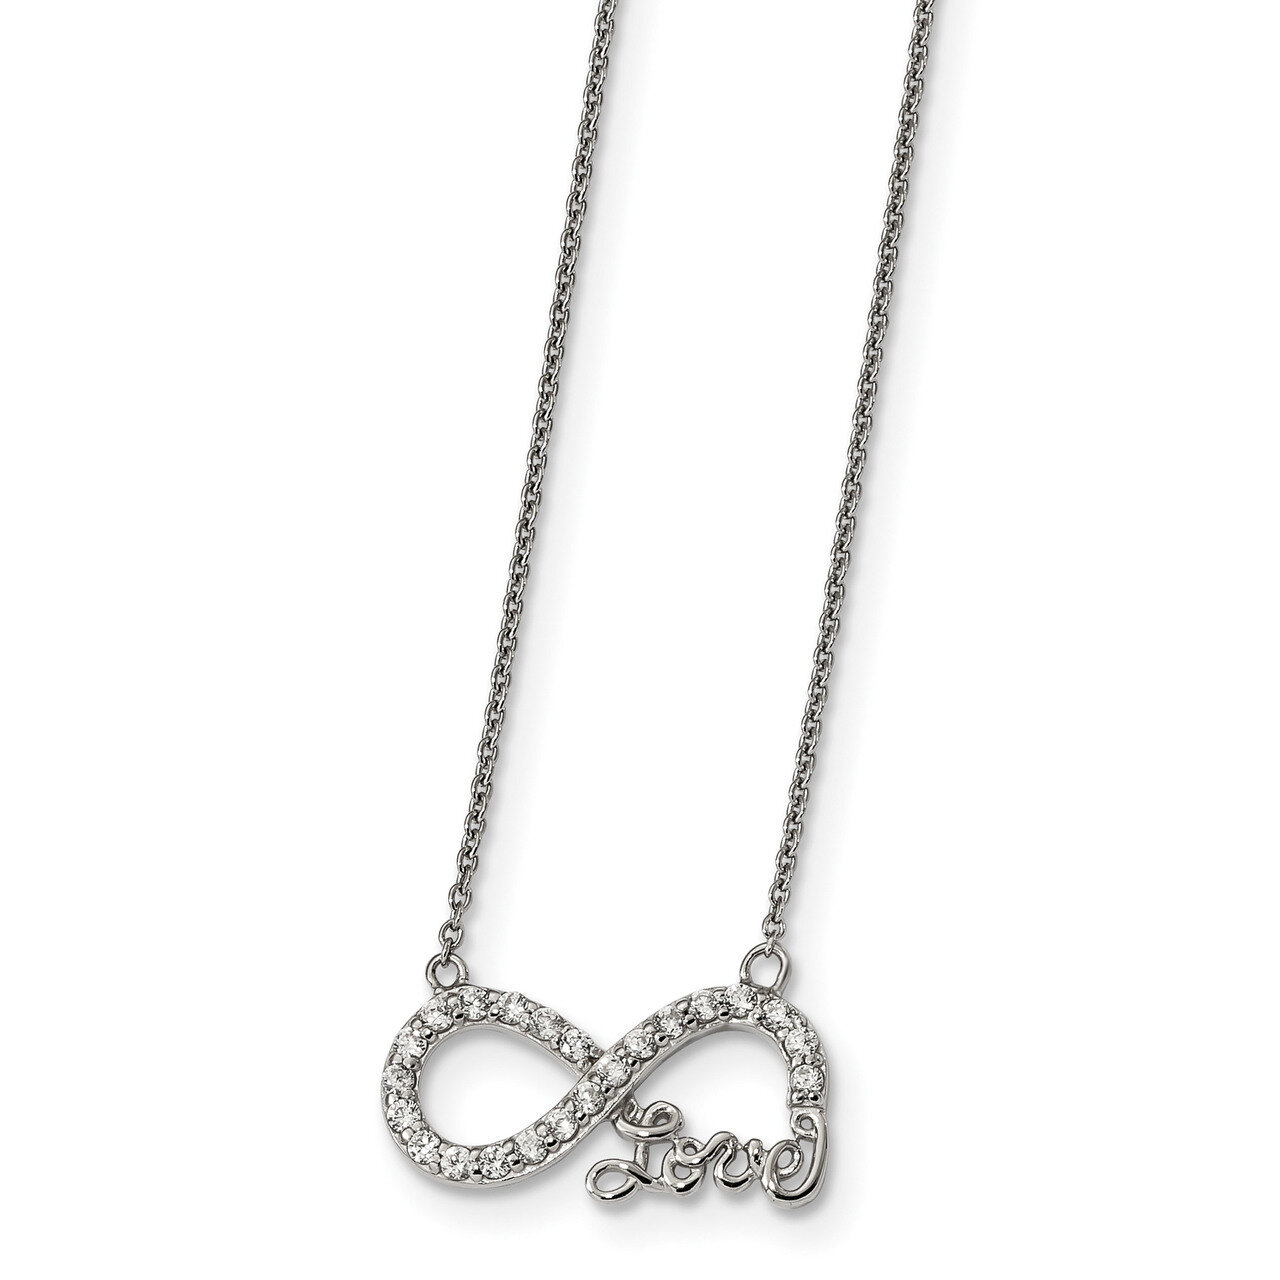 Inifinity Love Necklace Sterling Silver CZ QG4399-18